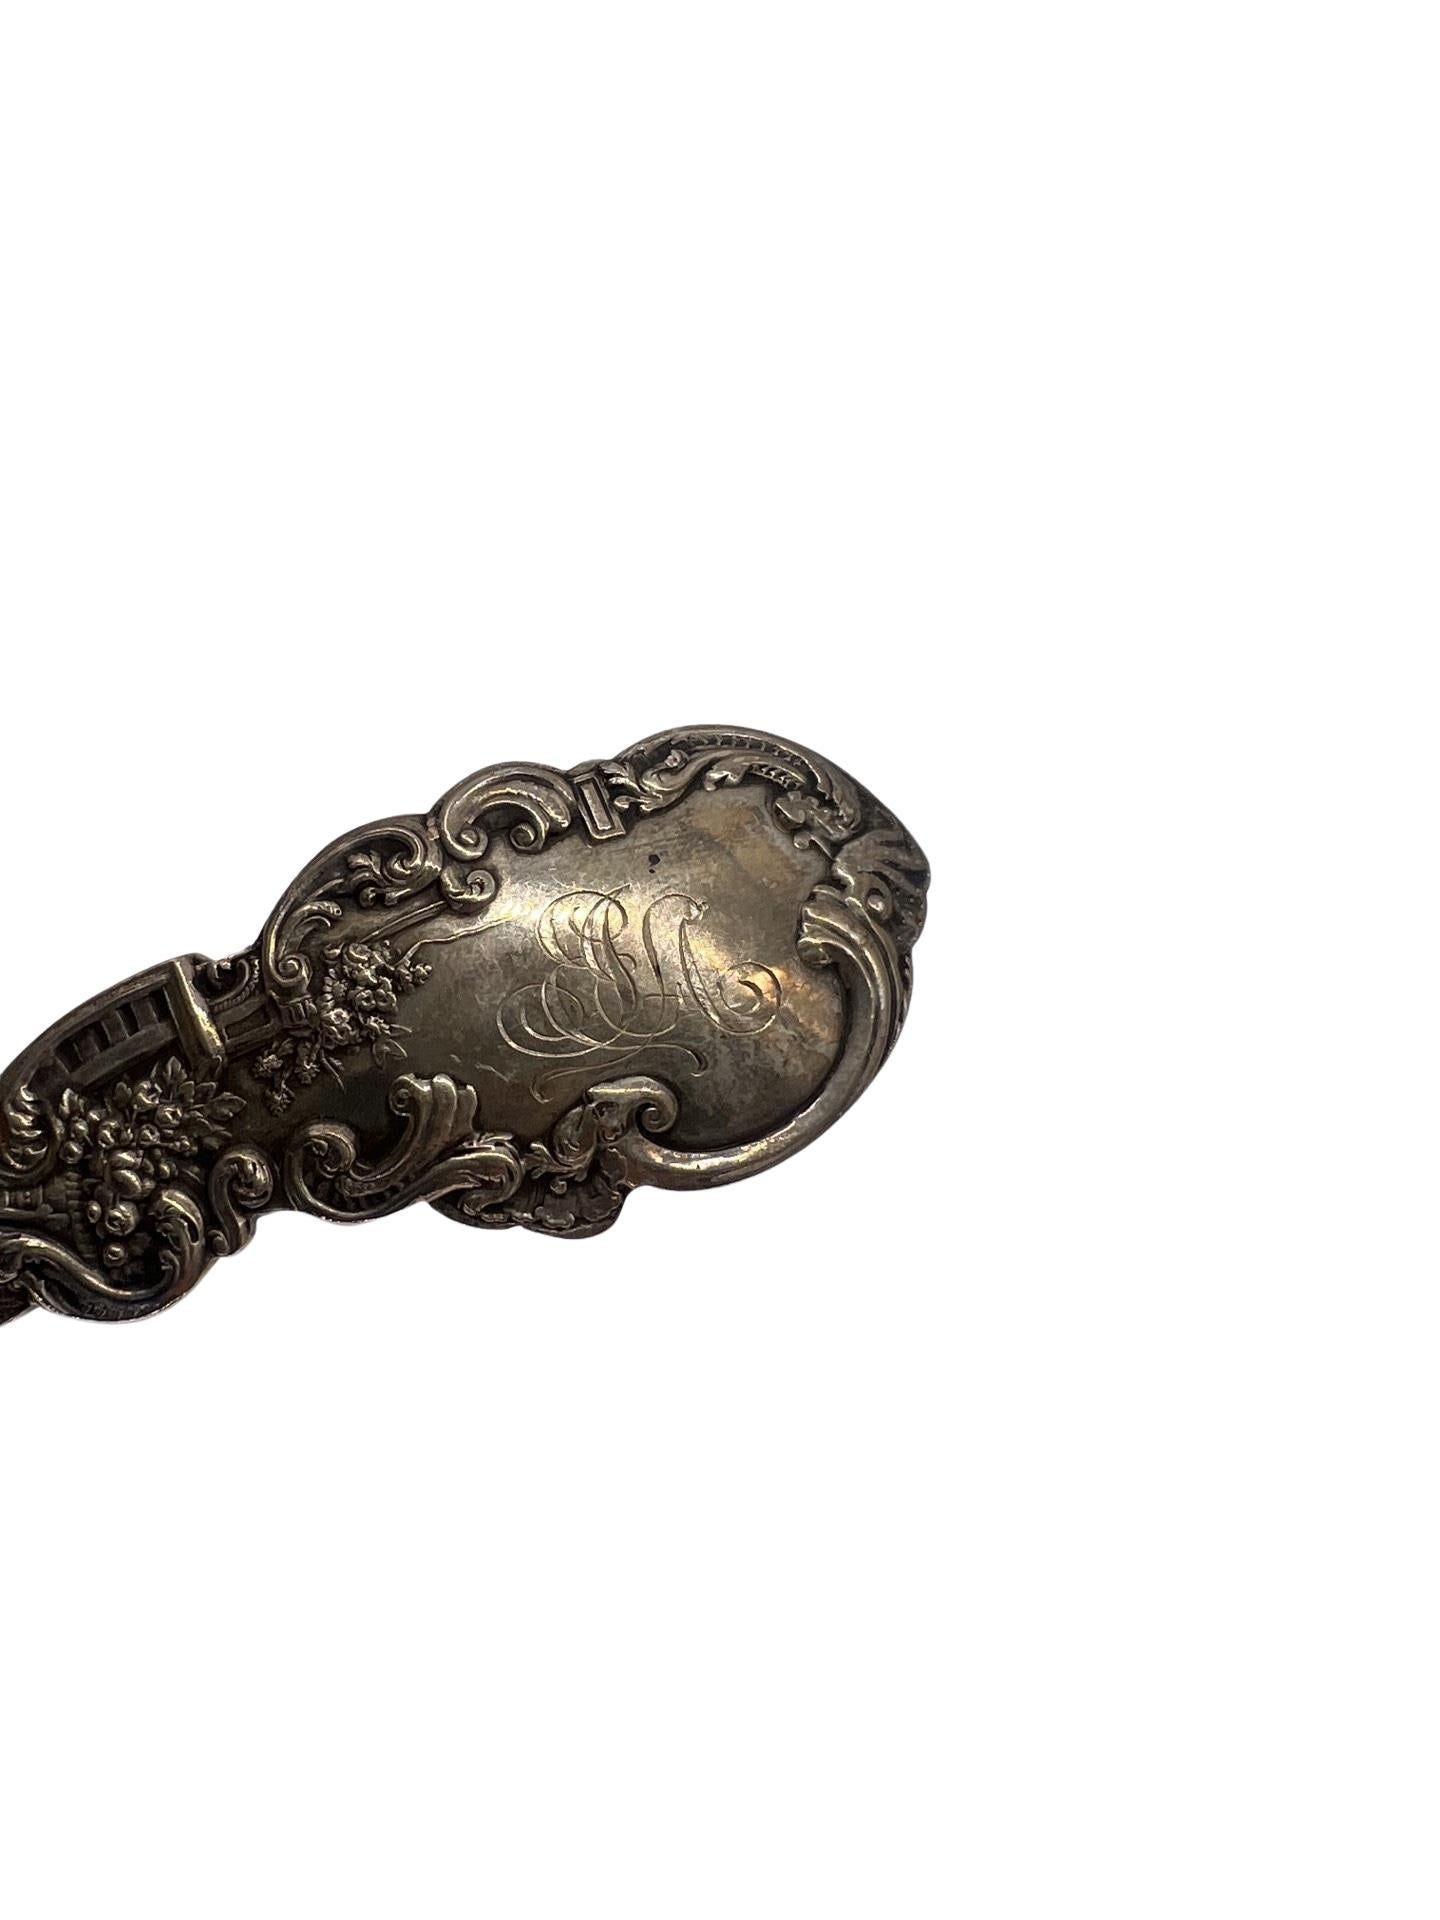 High Victorian Rare 1888 Gorham Sterling Silver Versailles Potato Serving Spoon 12.5” For Sale